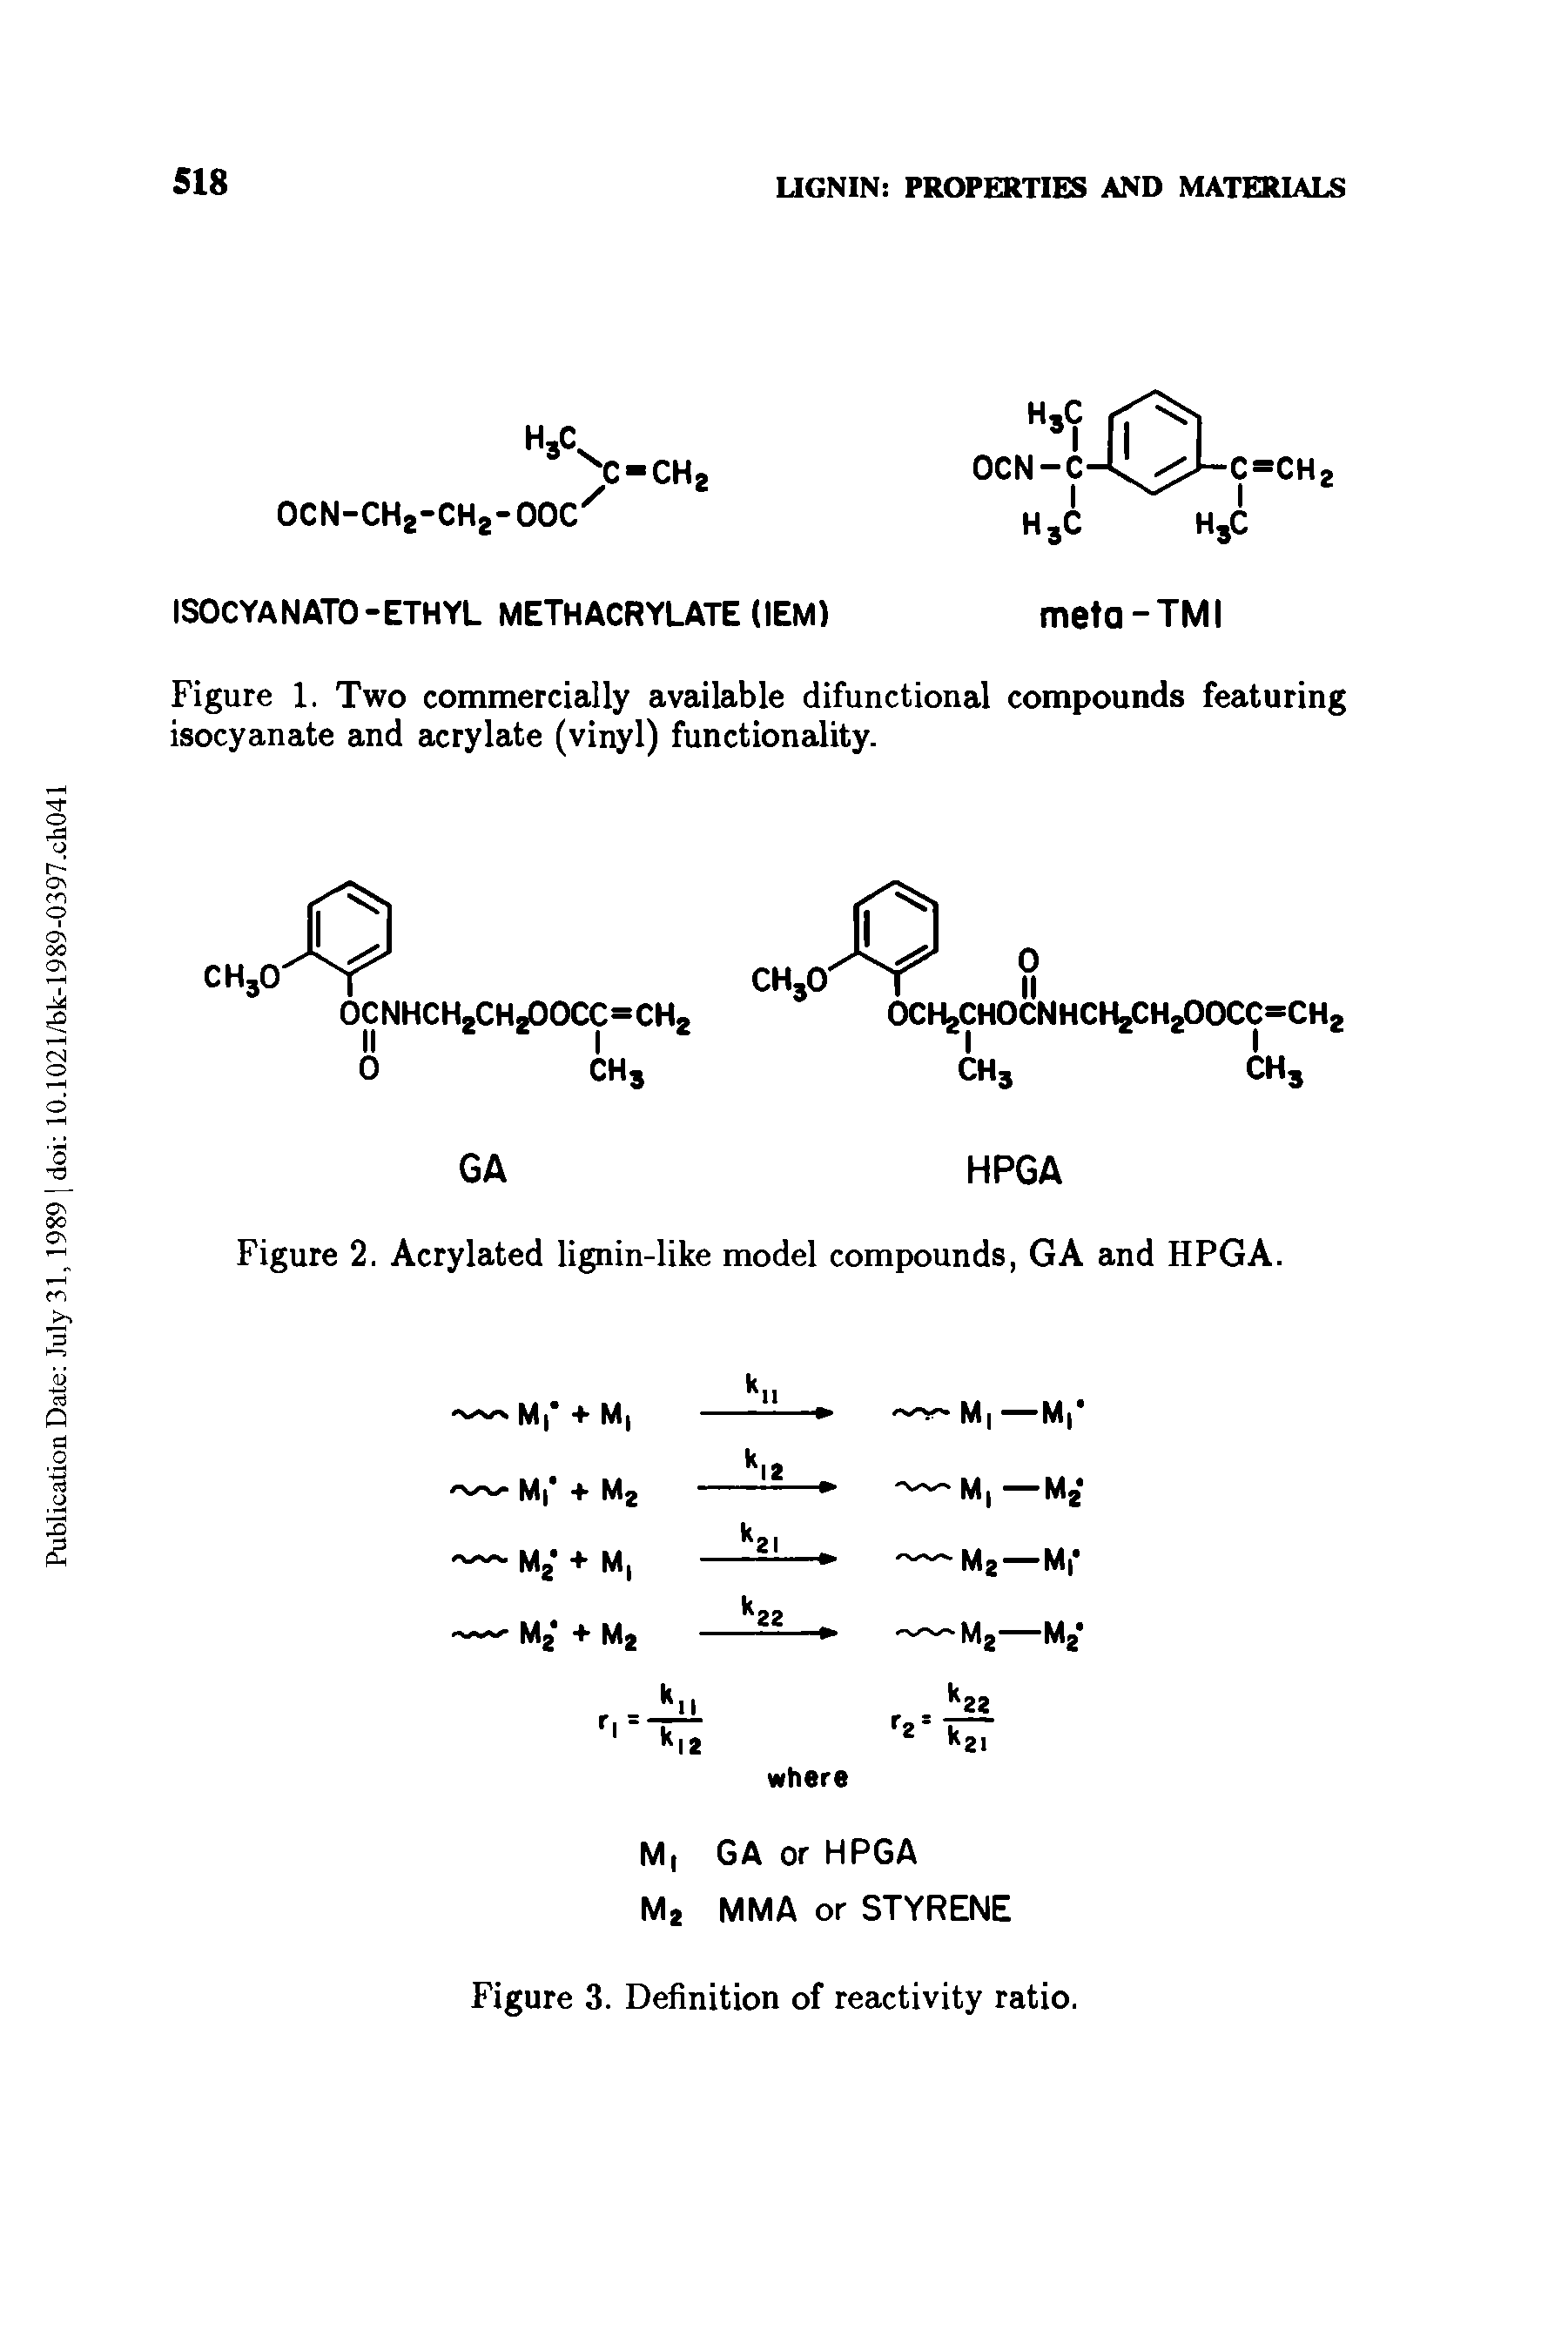 Figure 1. Two commercially available difunctional compounds featuring isocyanate and acrylate (vinyl) functionality.